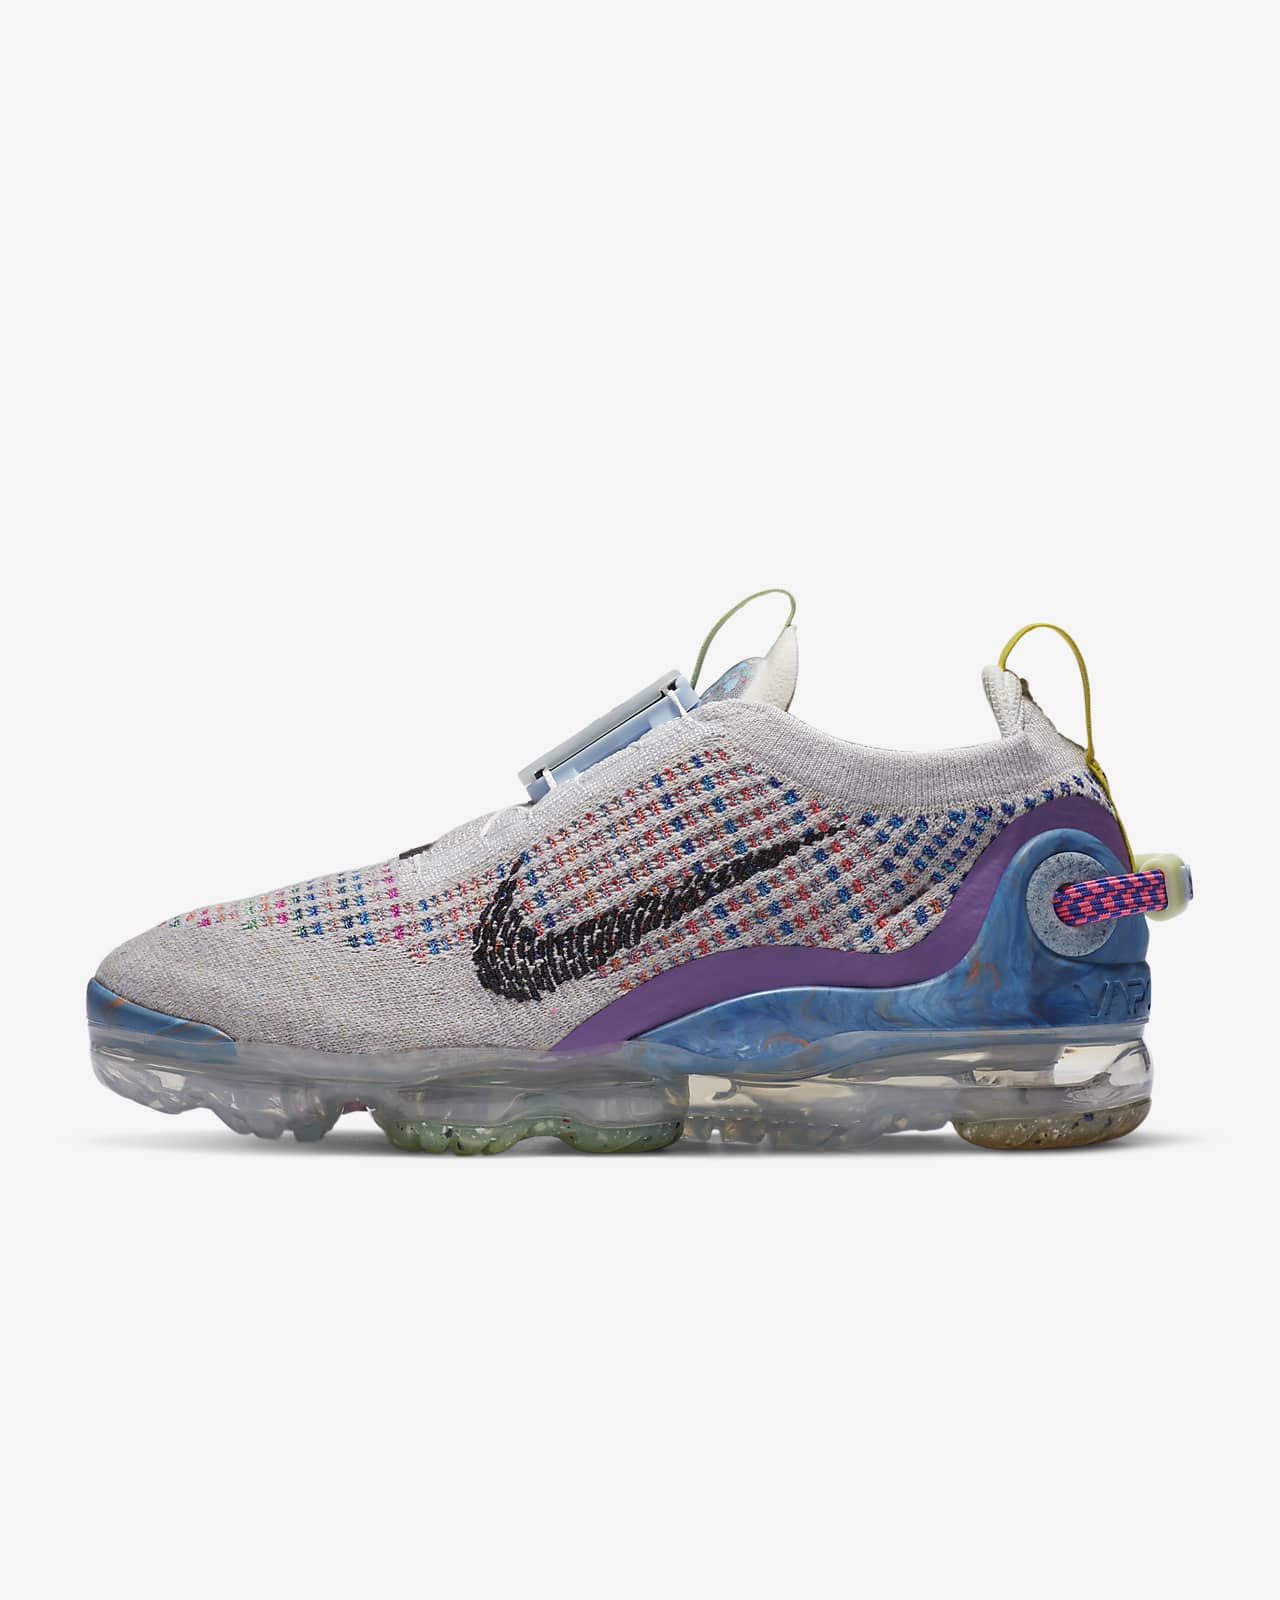 Buy Nike Air Vapormax 2020 Superior Quality Shoes For